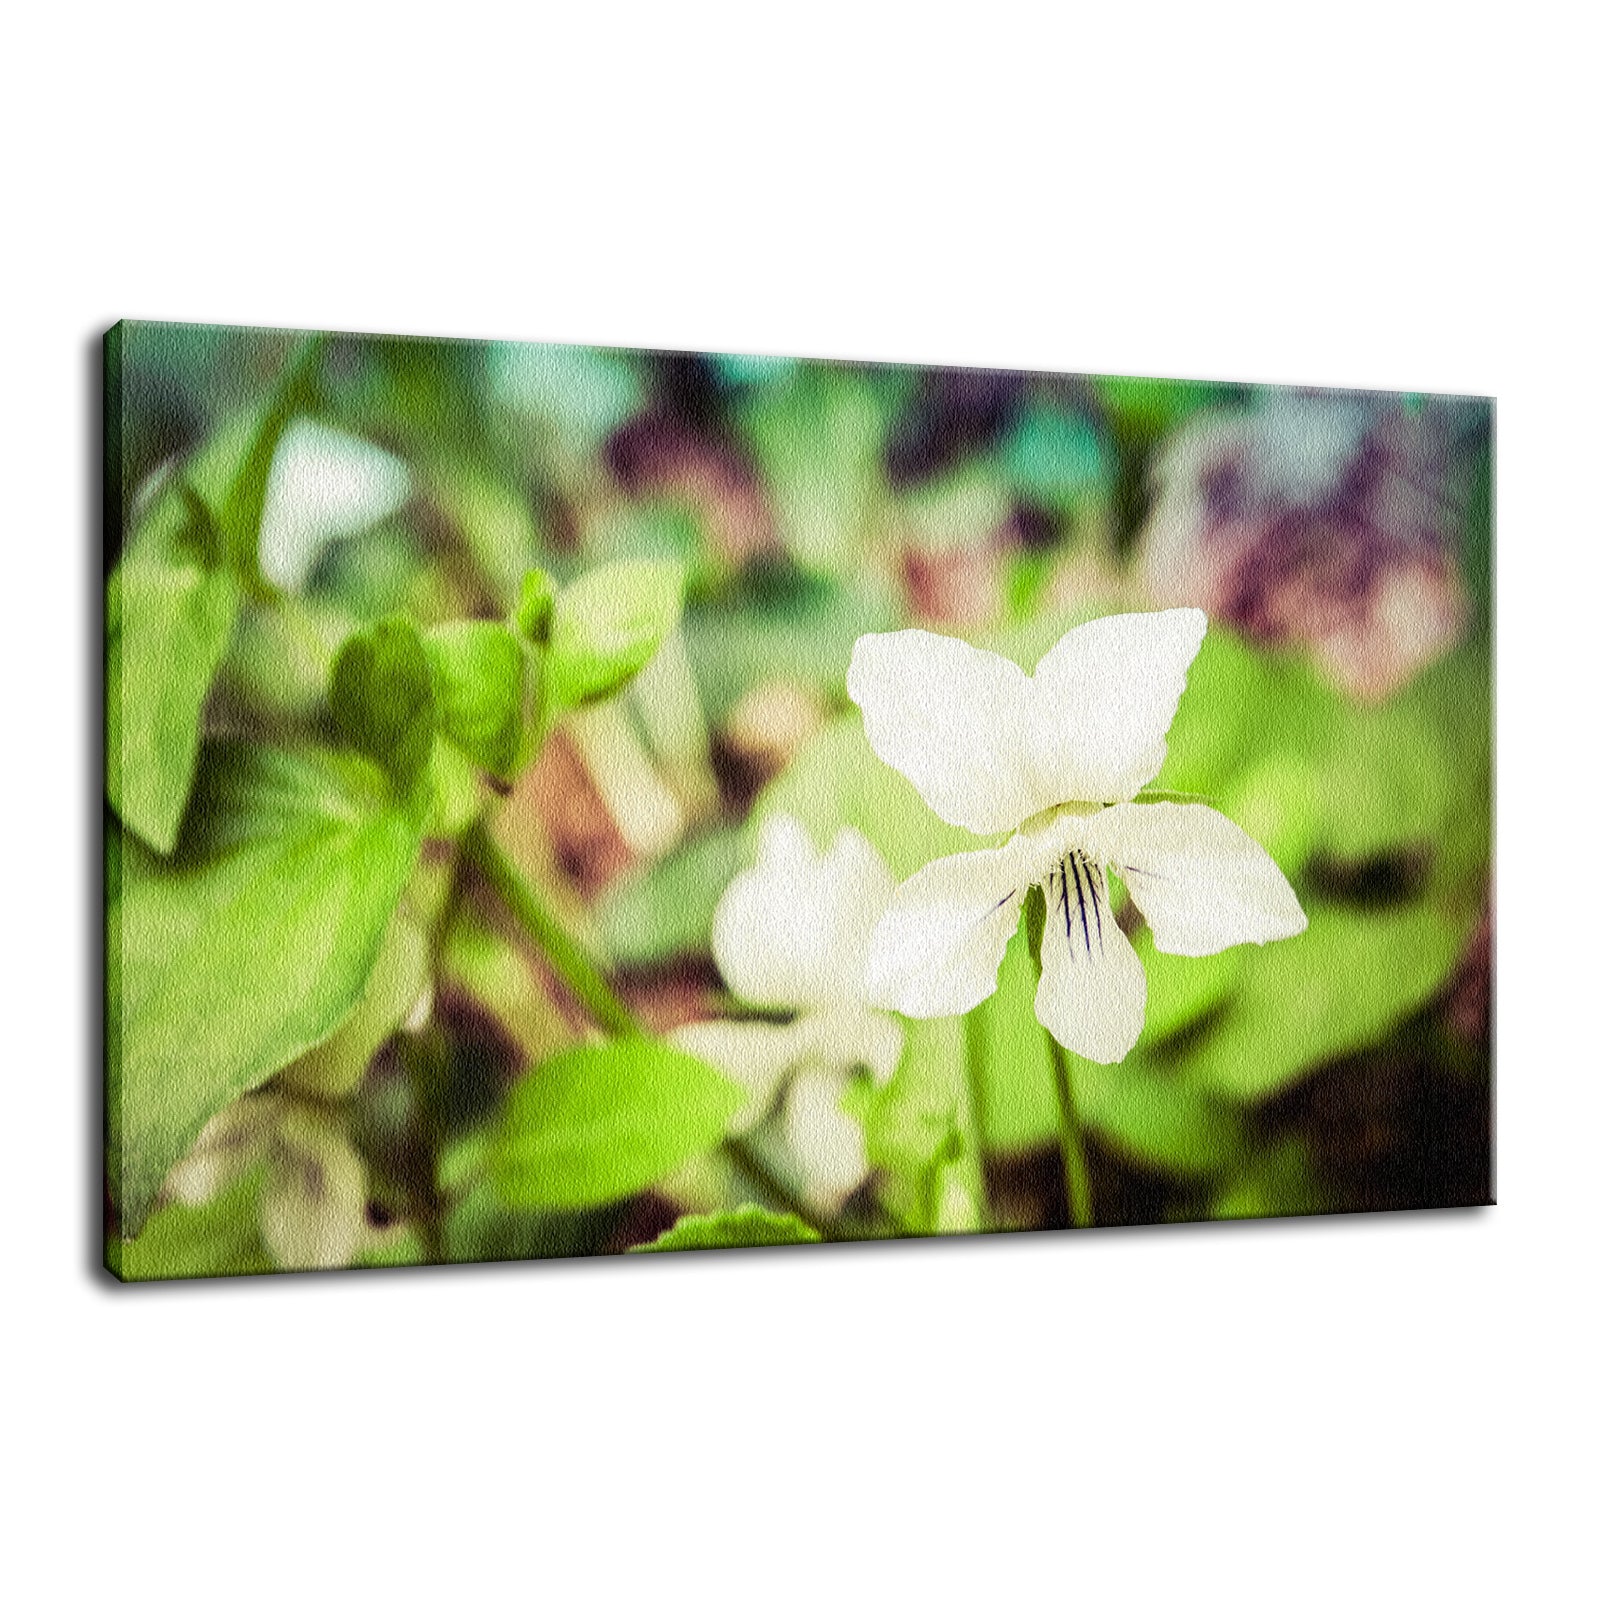 Tranquil China Violet Nature / Floral Photo Fine Art Canvas Wall Art Prints  - PIPAFINEART